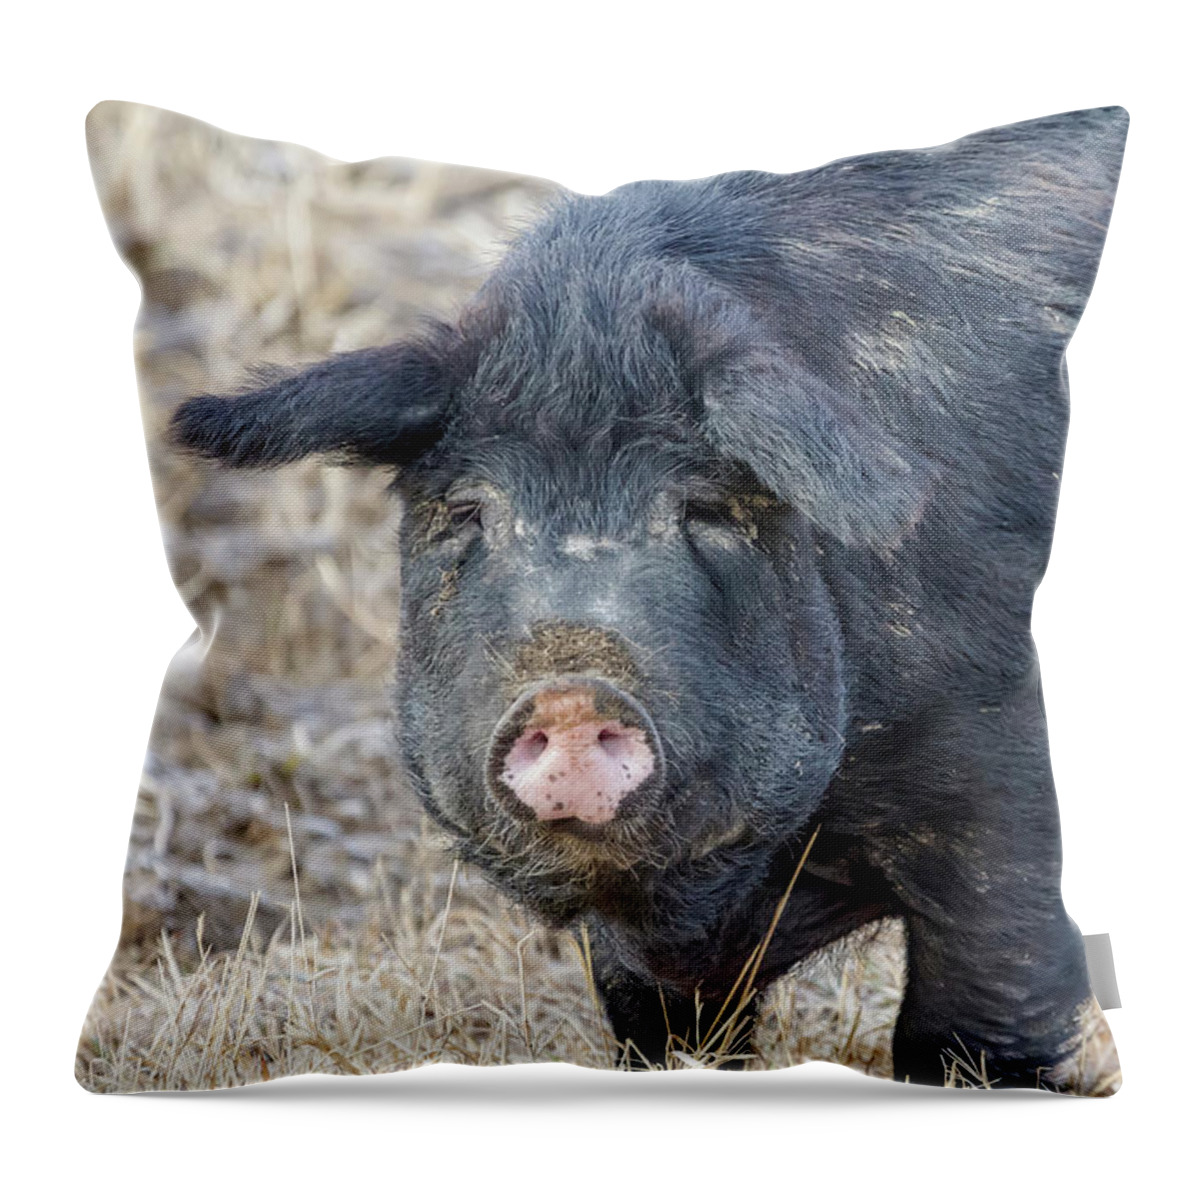 Pig Throw Pillow featuring the photograph Female Hog by James BO Insogna